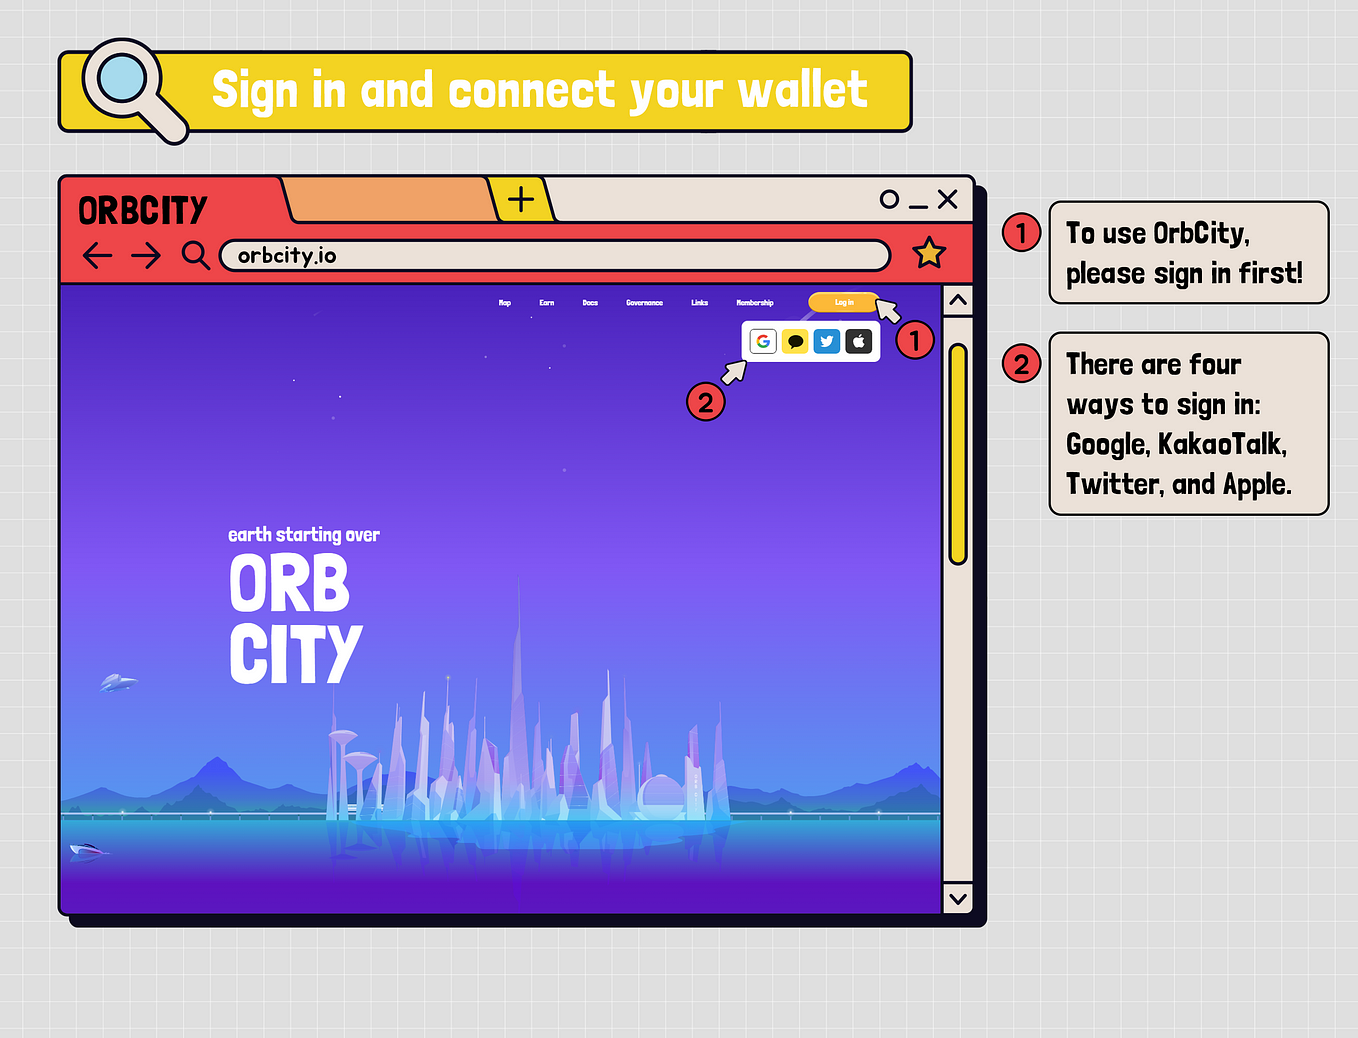 Orbcity Game Guide to Play and Earn ORB Crypto Tokens